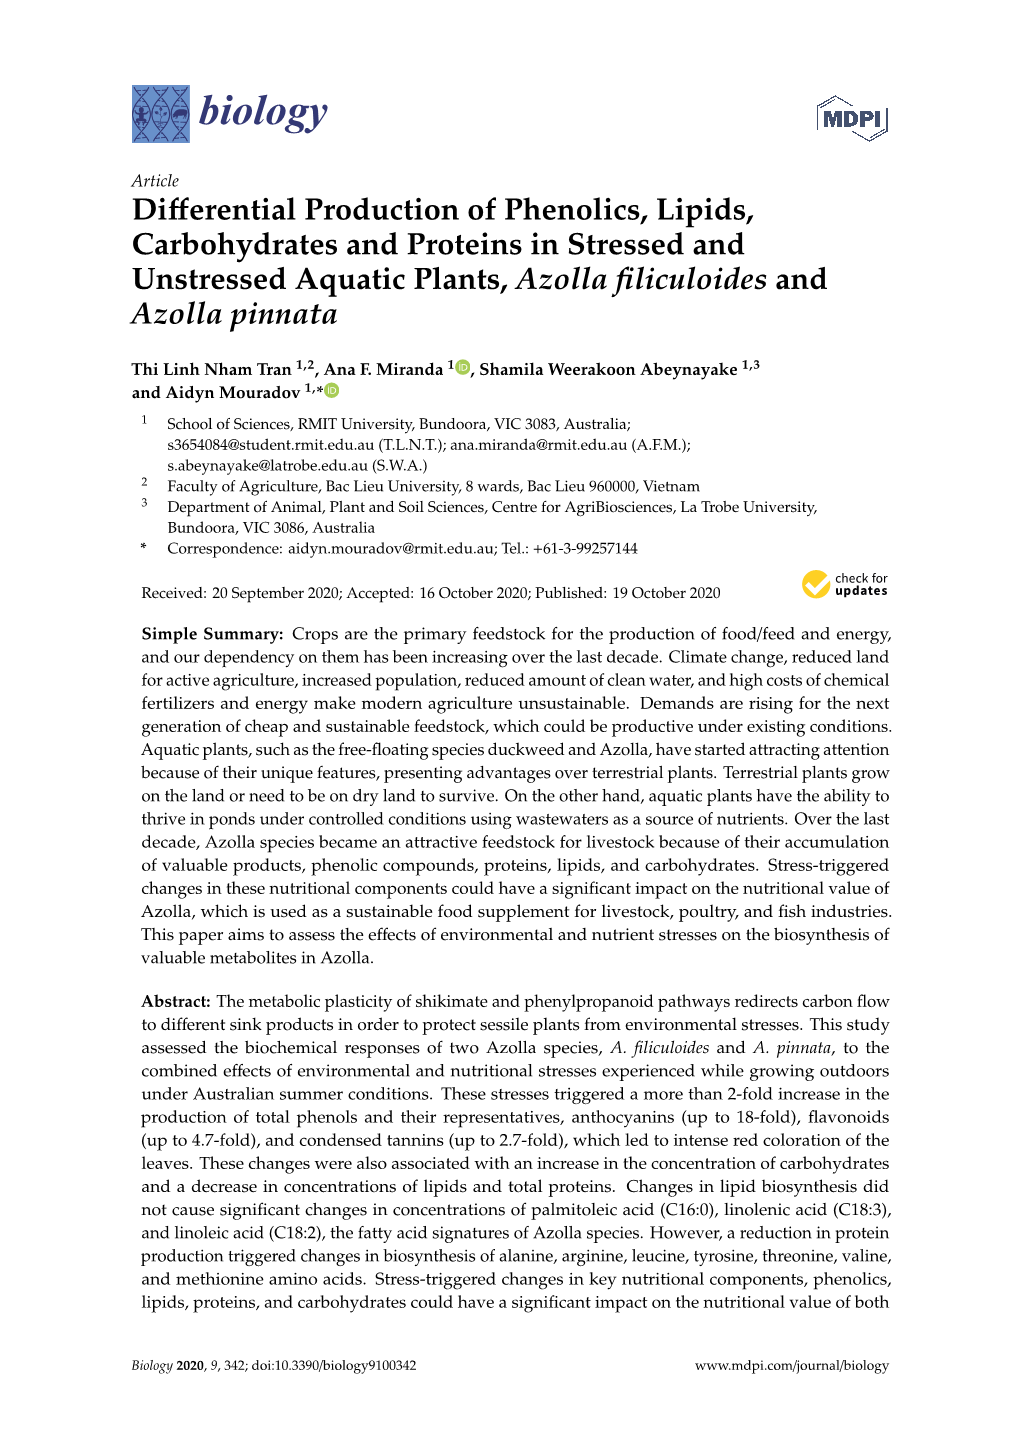 Differential Production of Phenolics, Lipids, Carbohydrates and Proteins